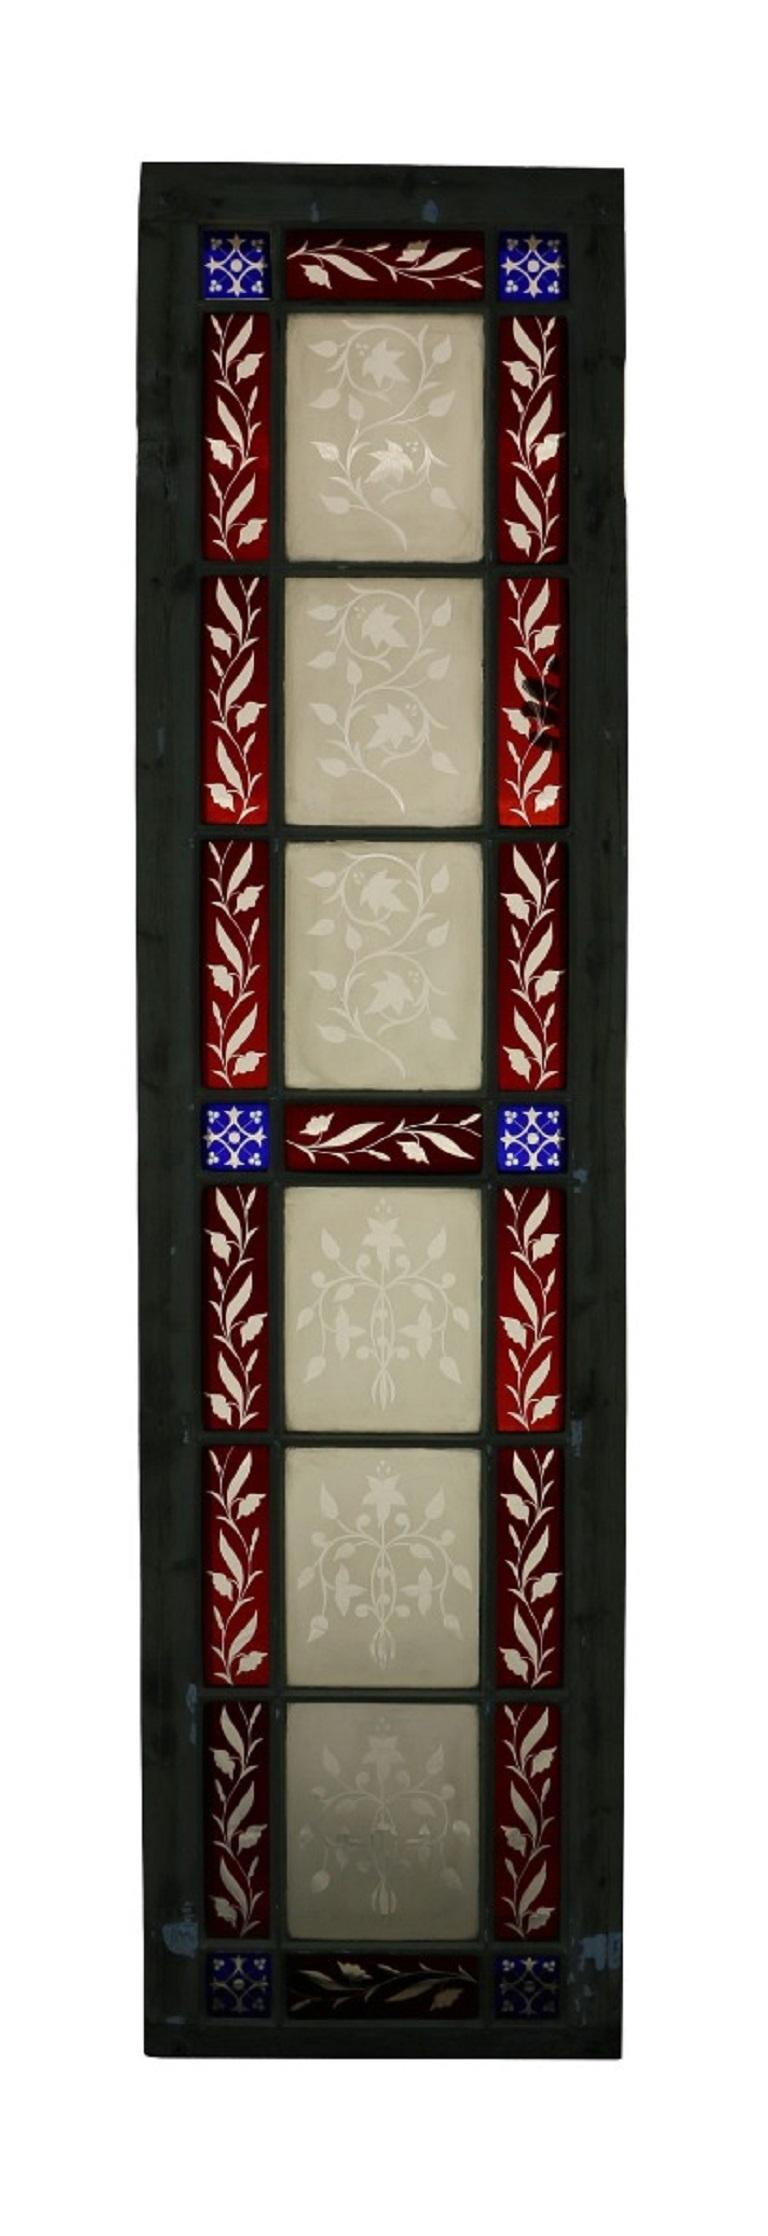 This leaded glass window was salvaged from a house in Derby, UK.